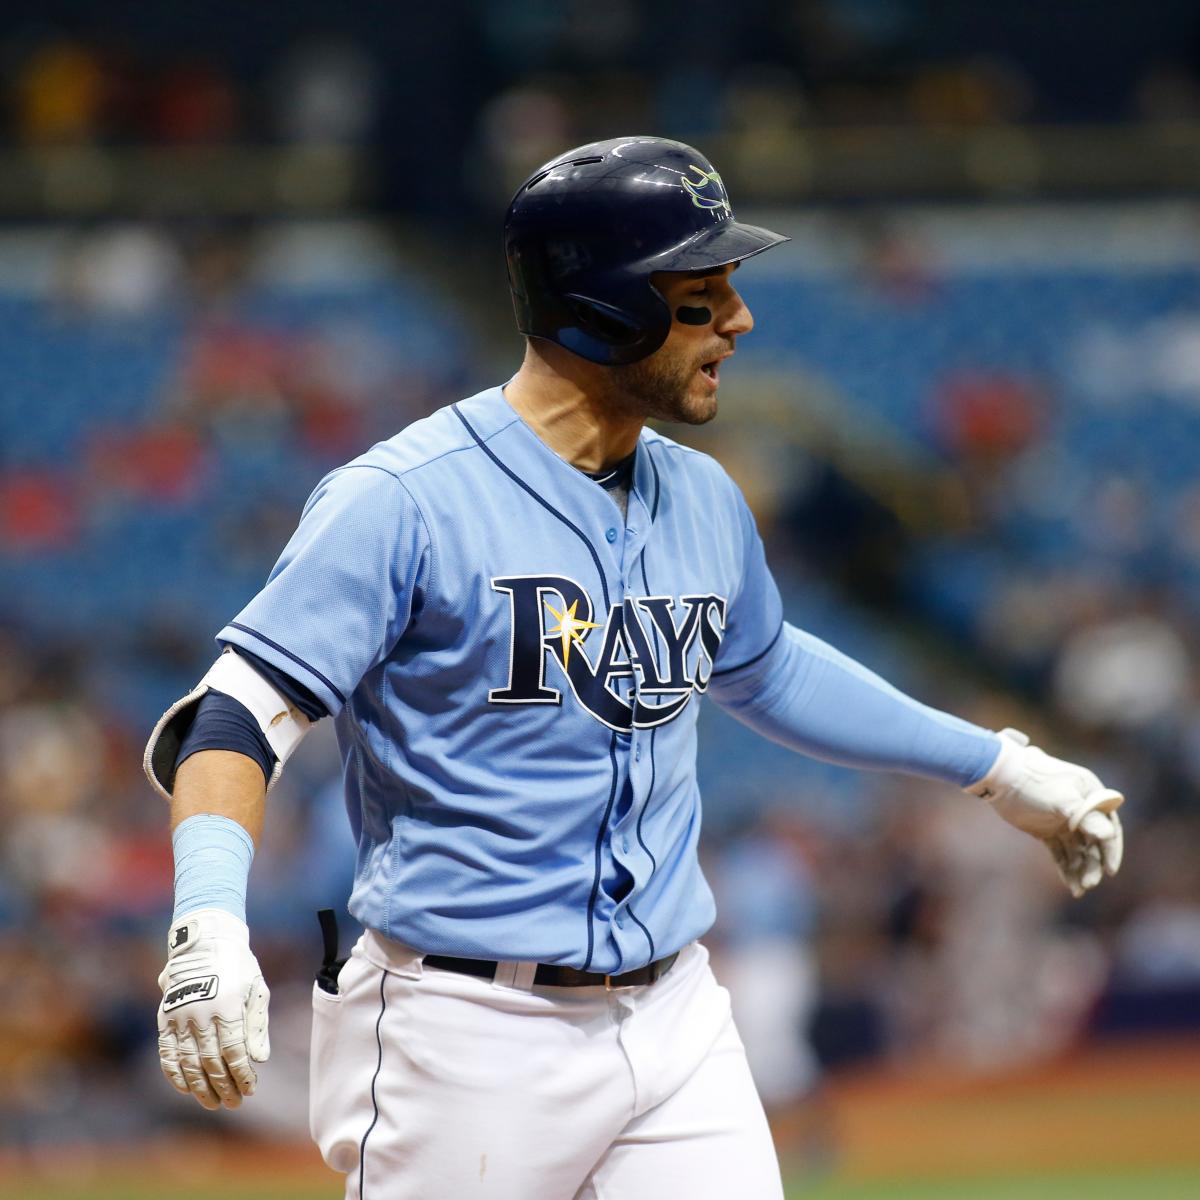 Kevin Kiermaier Says He Won't Cover Body in Vaseline to Keep Warm